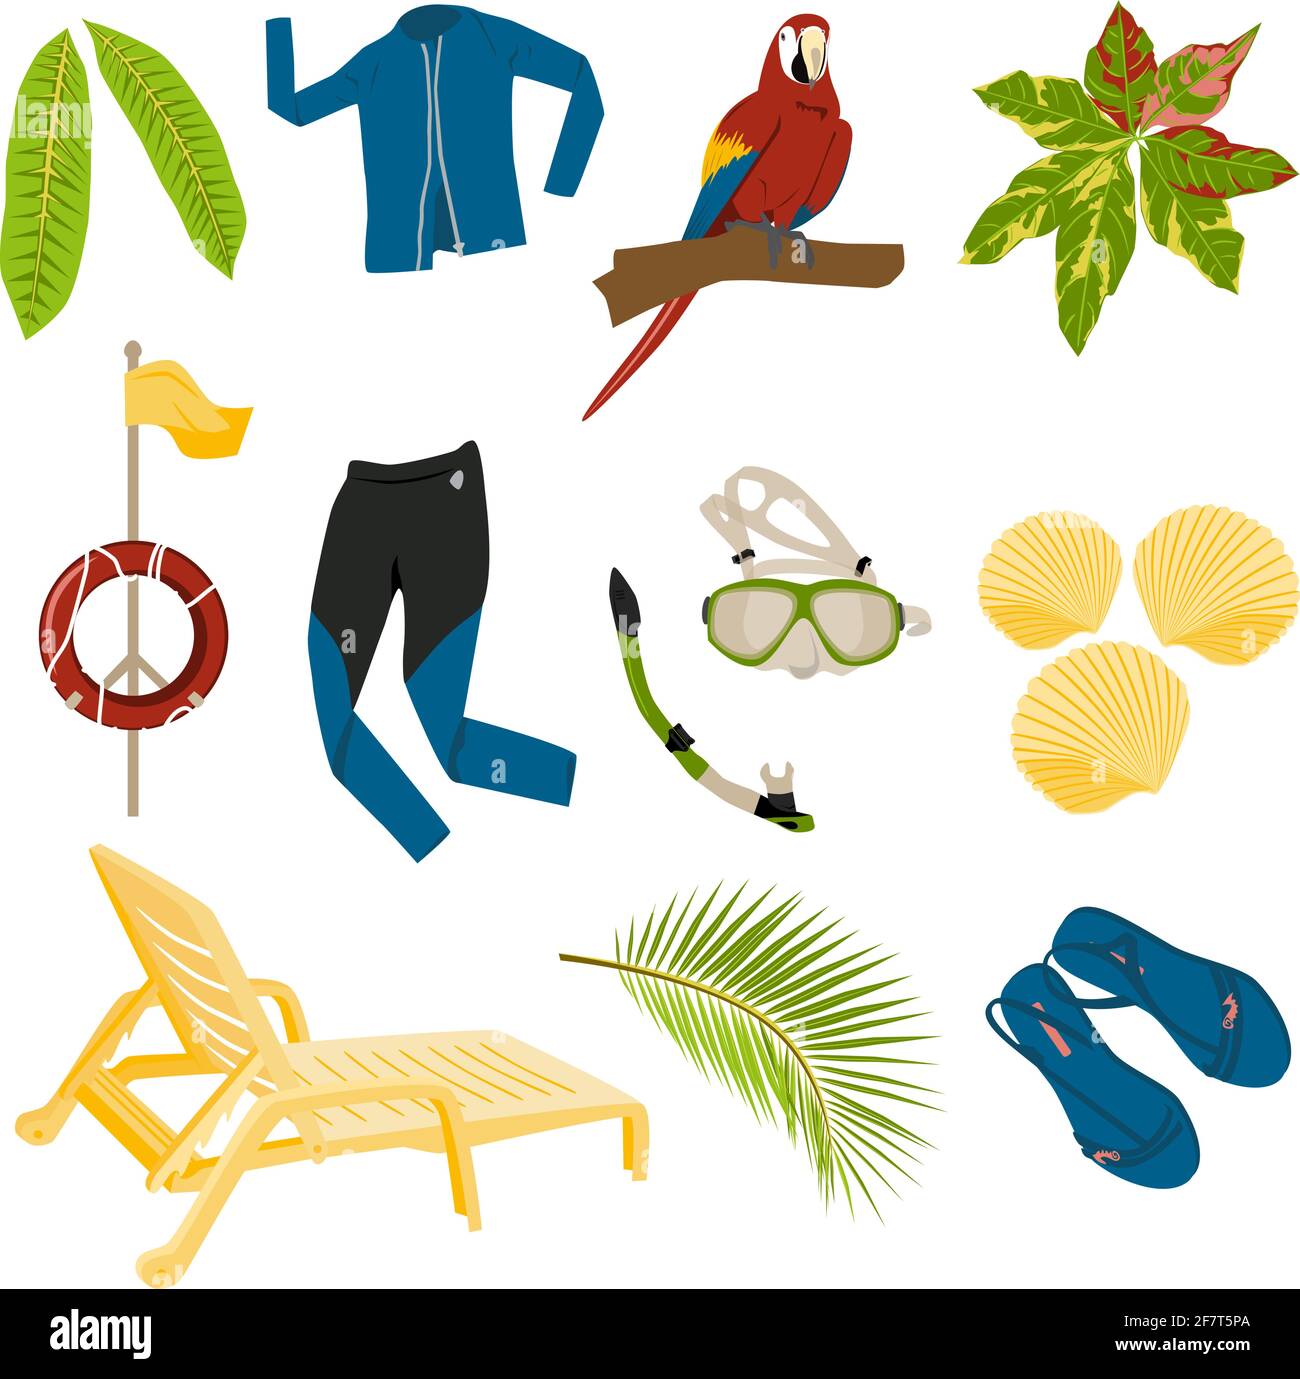 summer items set from tropical plants, parrot, swimming suit for surfing, swimming mask, snorkel, shells, sun lounger, flip flops, lifebuoy isolated, Stock Vector